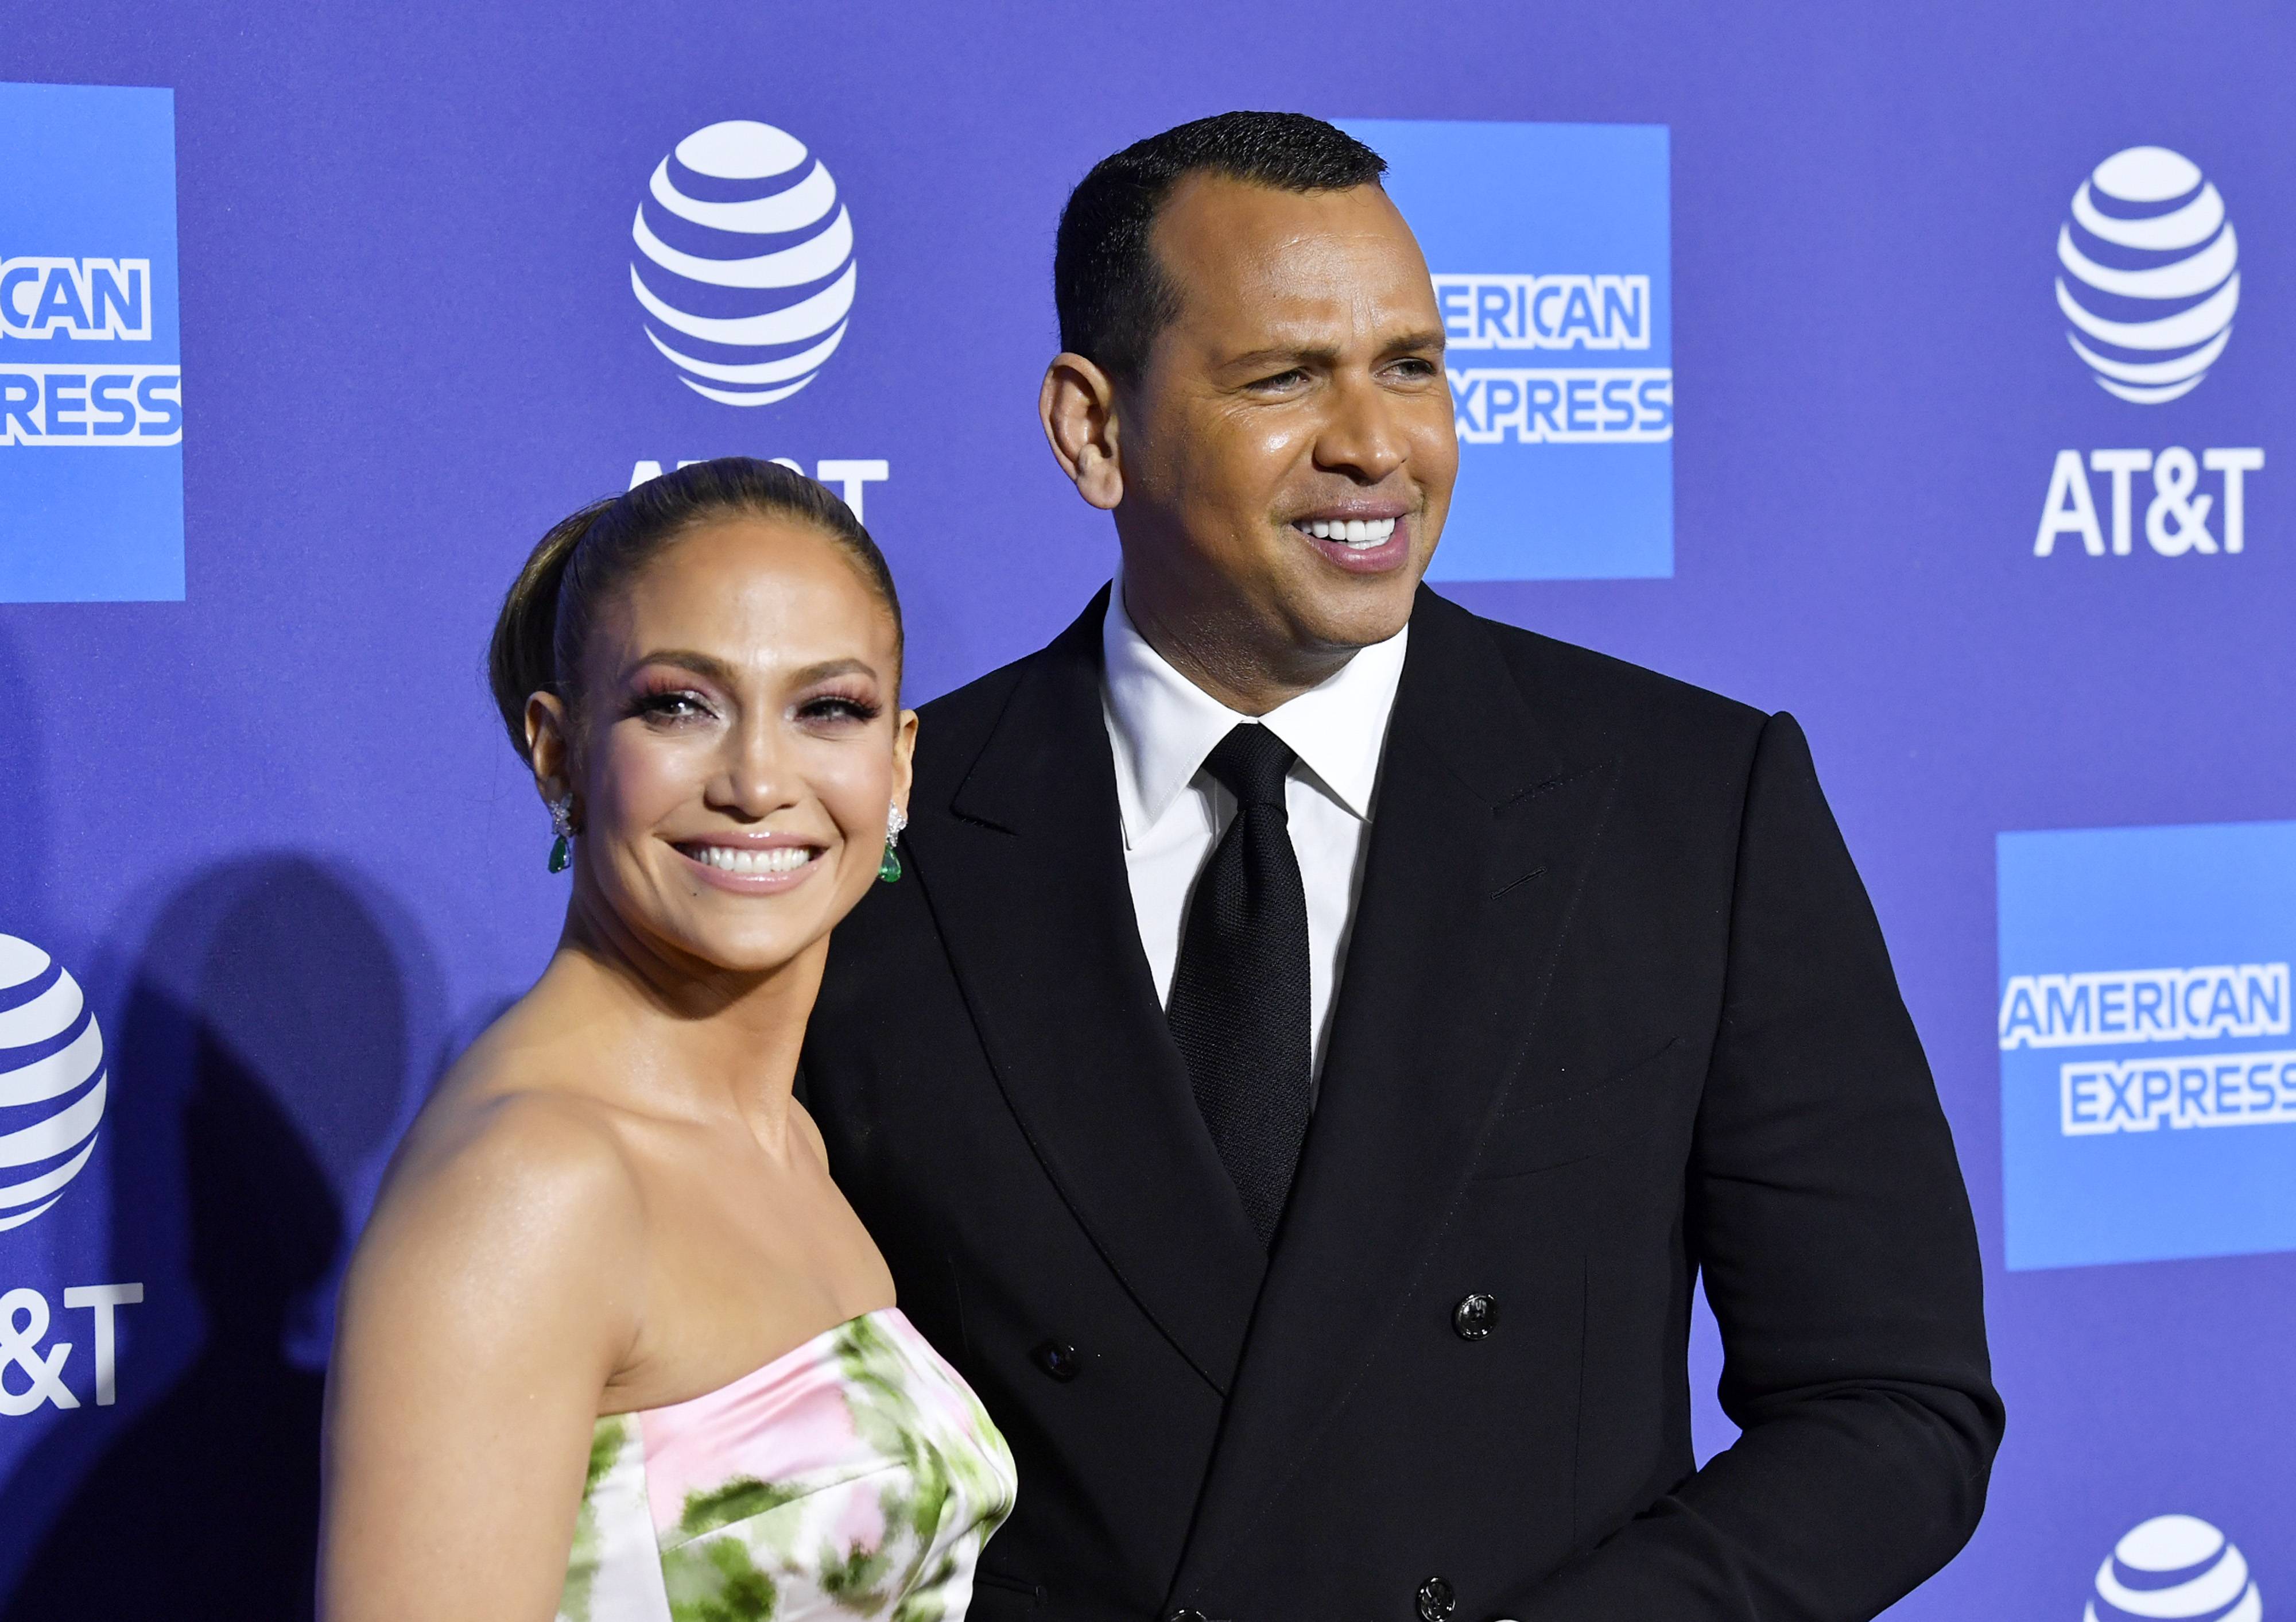 PALM SPRINGS, CALIFORNIA - JANUARY 02: (L-R) Jennifer Lopez and Alex Rodriguez attend the 31st Annual Palm Springs International Film Festival Film Awards Gala at Palm Springs Convention Center on January 02, 2020 in Palm Springs, California. (Photo by Frazer Harrison/Getty Images for Palm Springs International Film Festival)